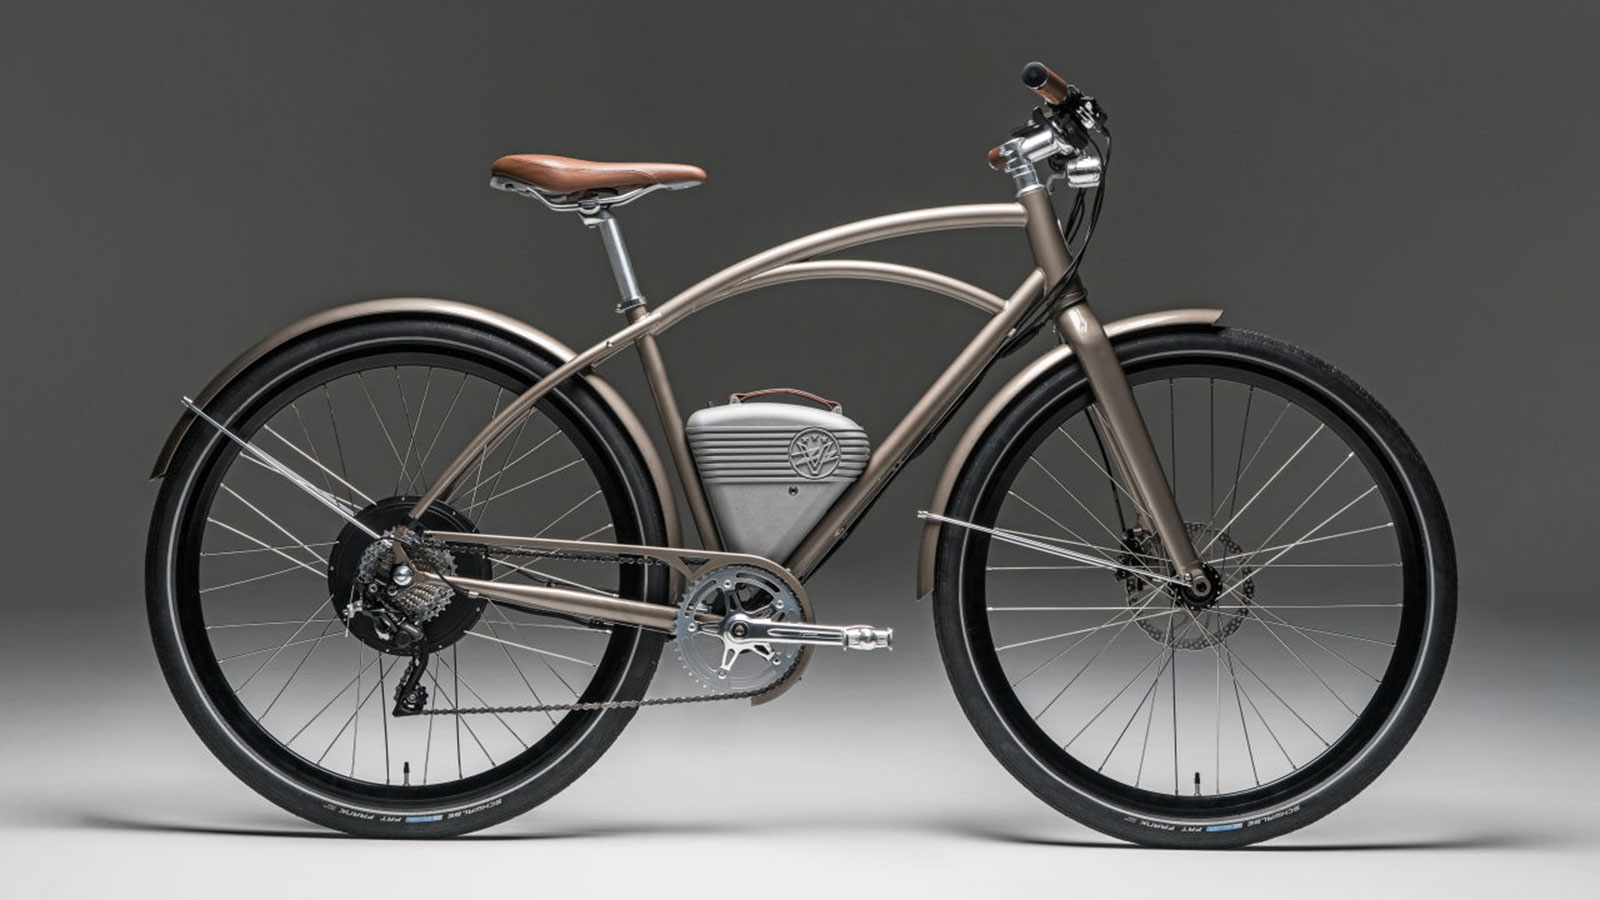 VINTAGE ELECTRIC CAFE - A CLASSIC BIKE WITH A MODERN TWIST